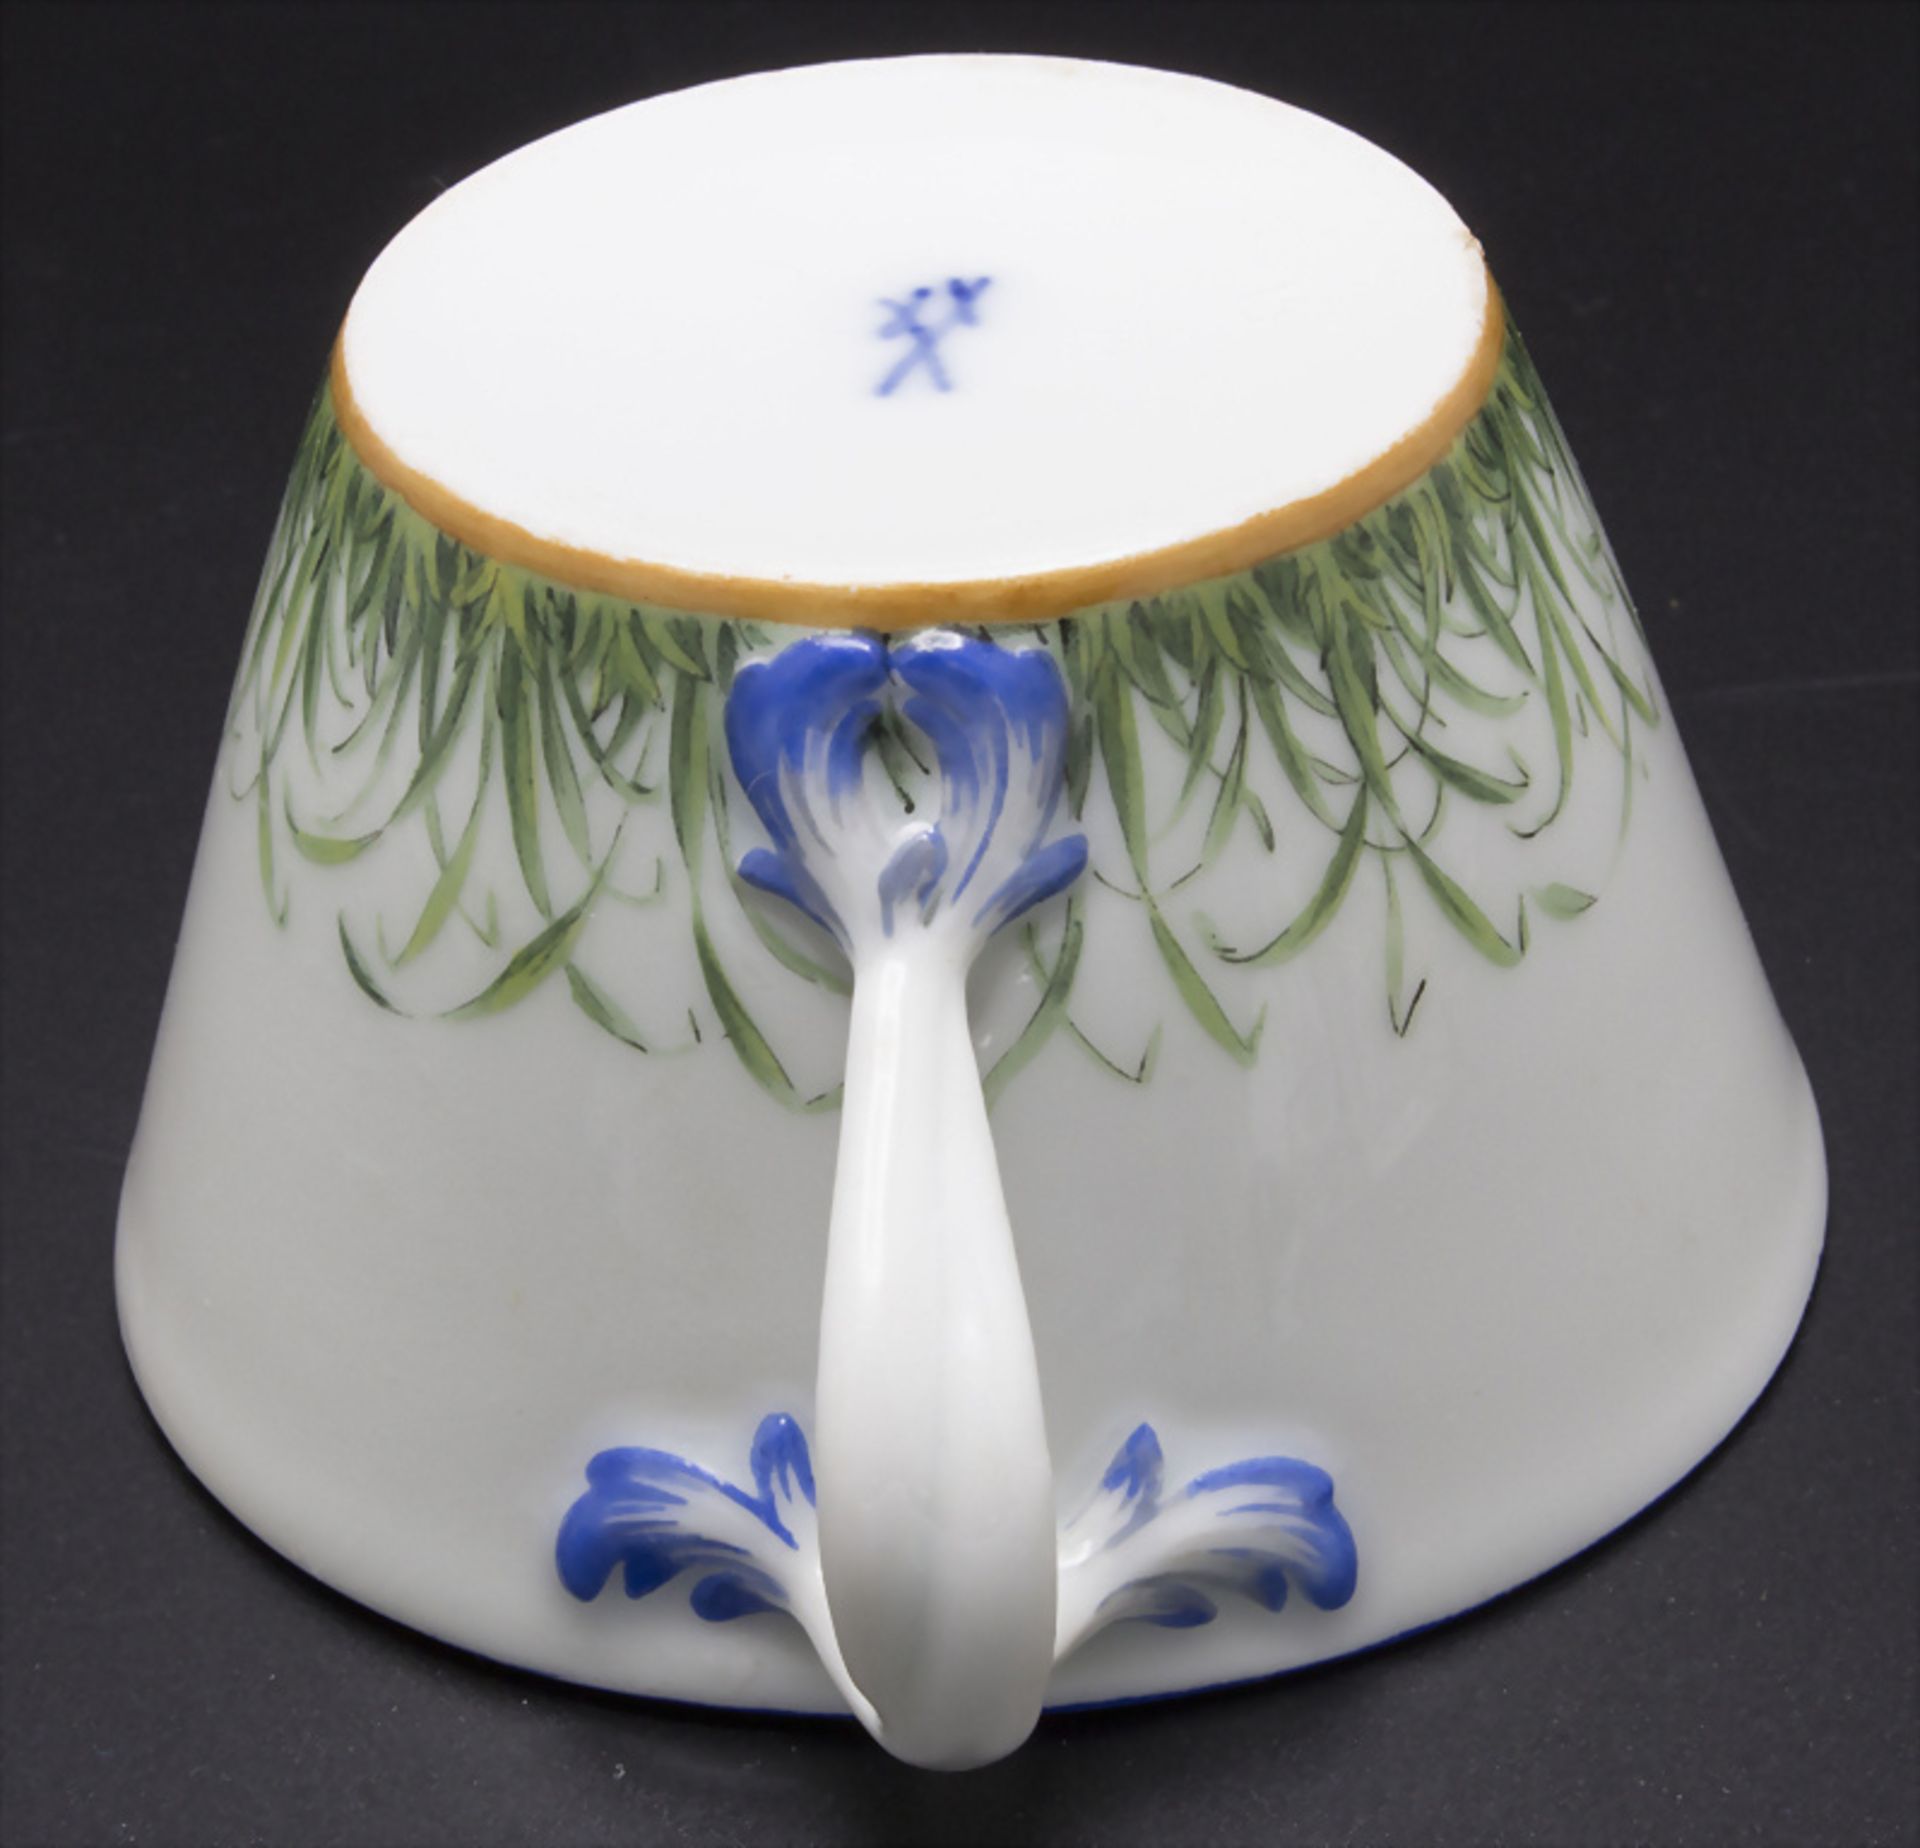 Tasse und UT mit Monogramm / A cup with saucer with monogram, Meissen, Anfang 19. Jh. - Image 8 of 9